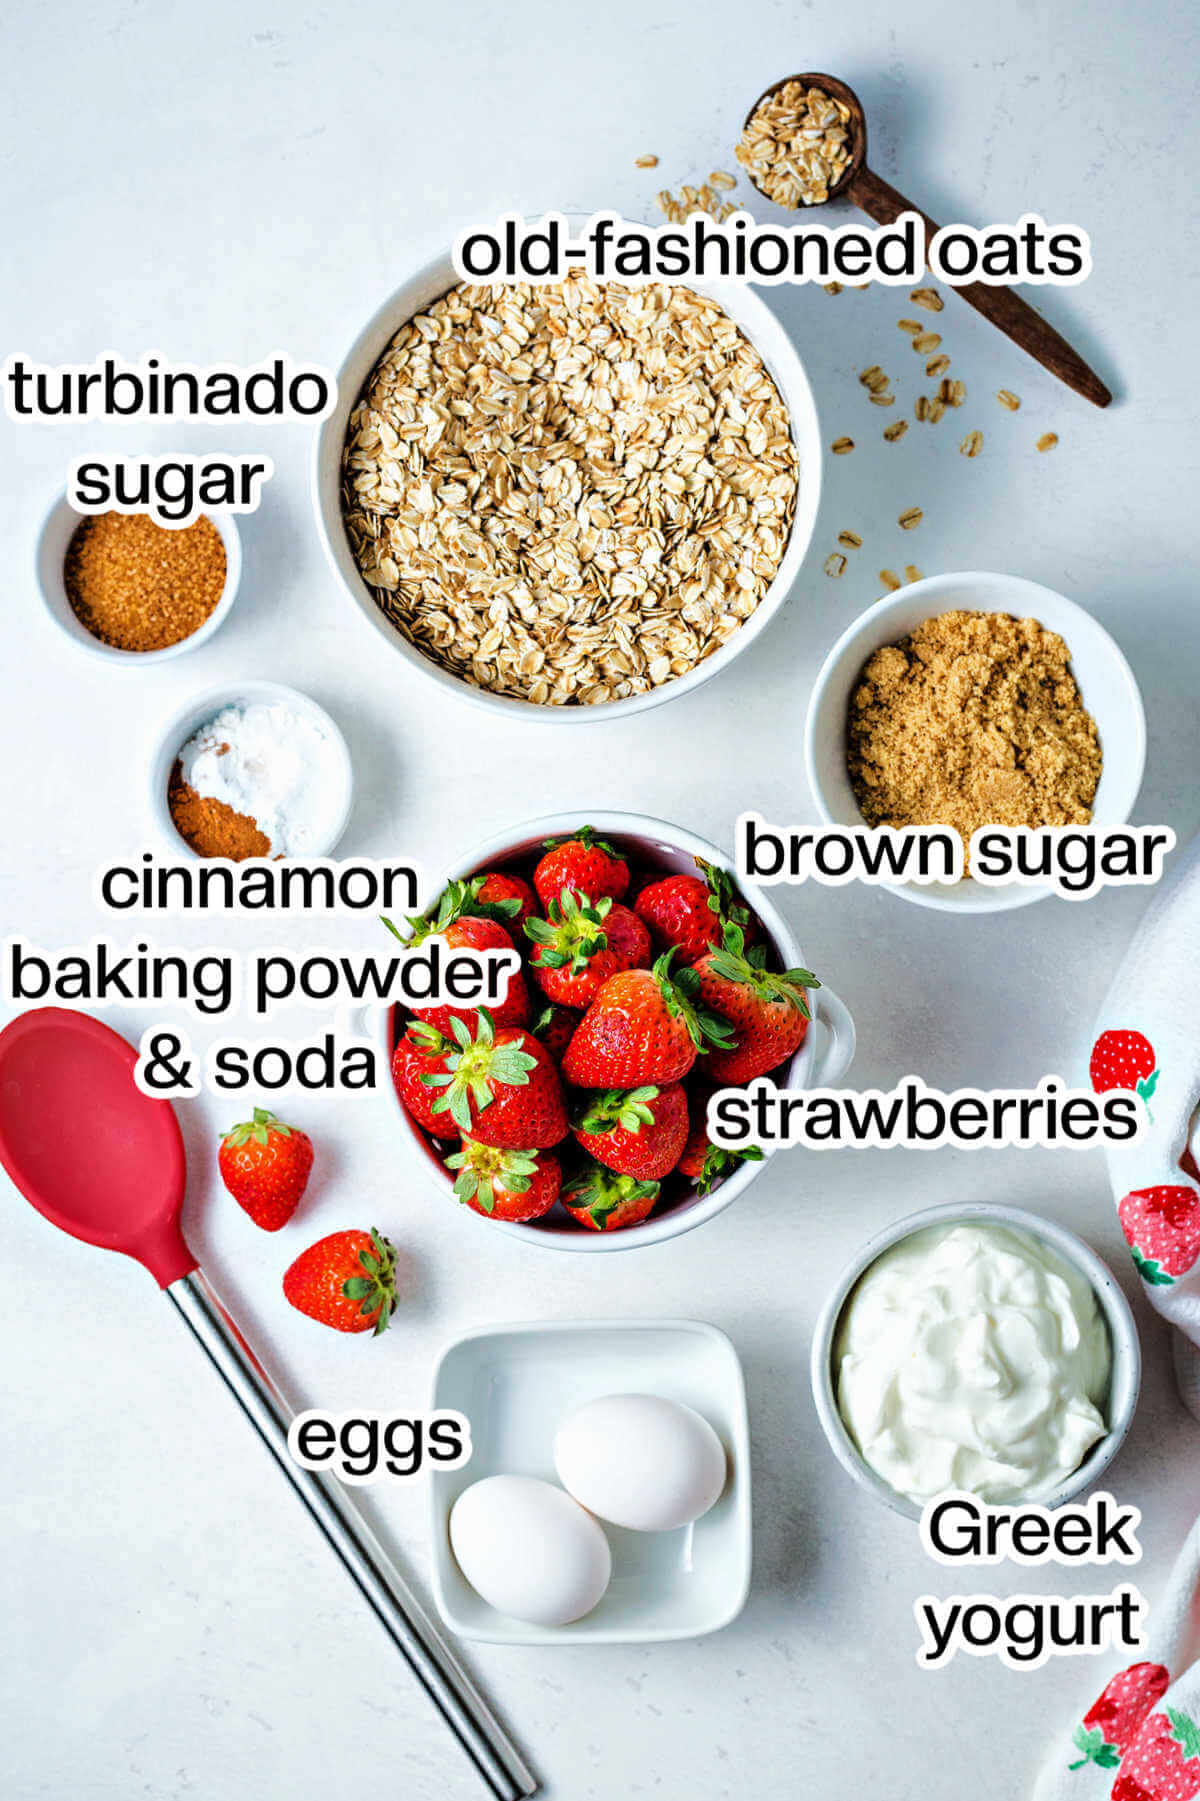 Ingredients for strawberry oat muffins on a table.